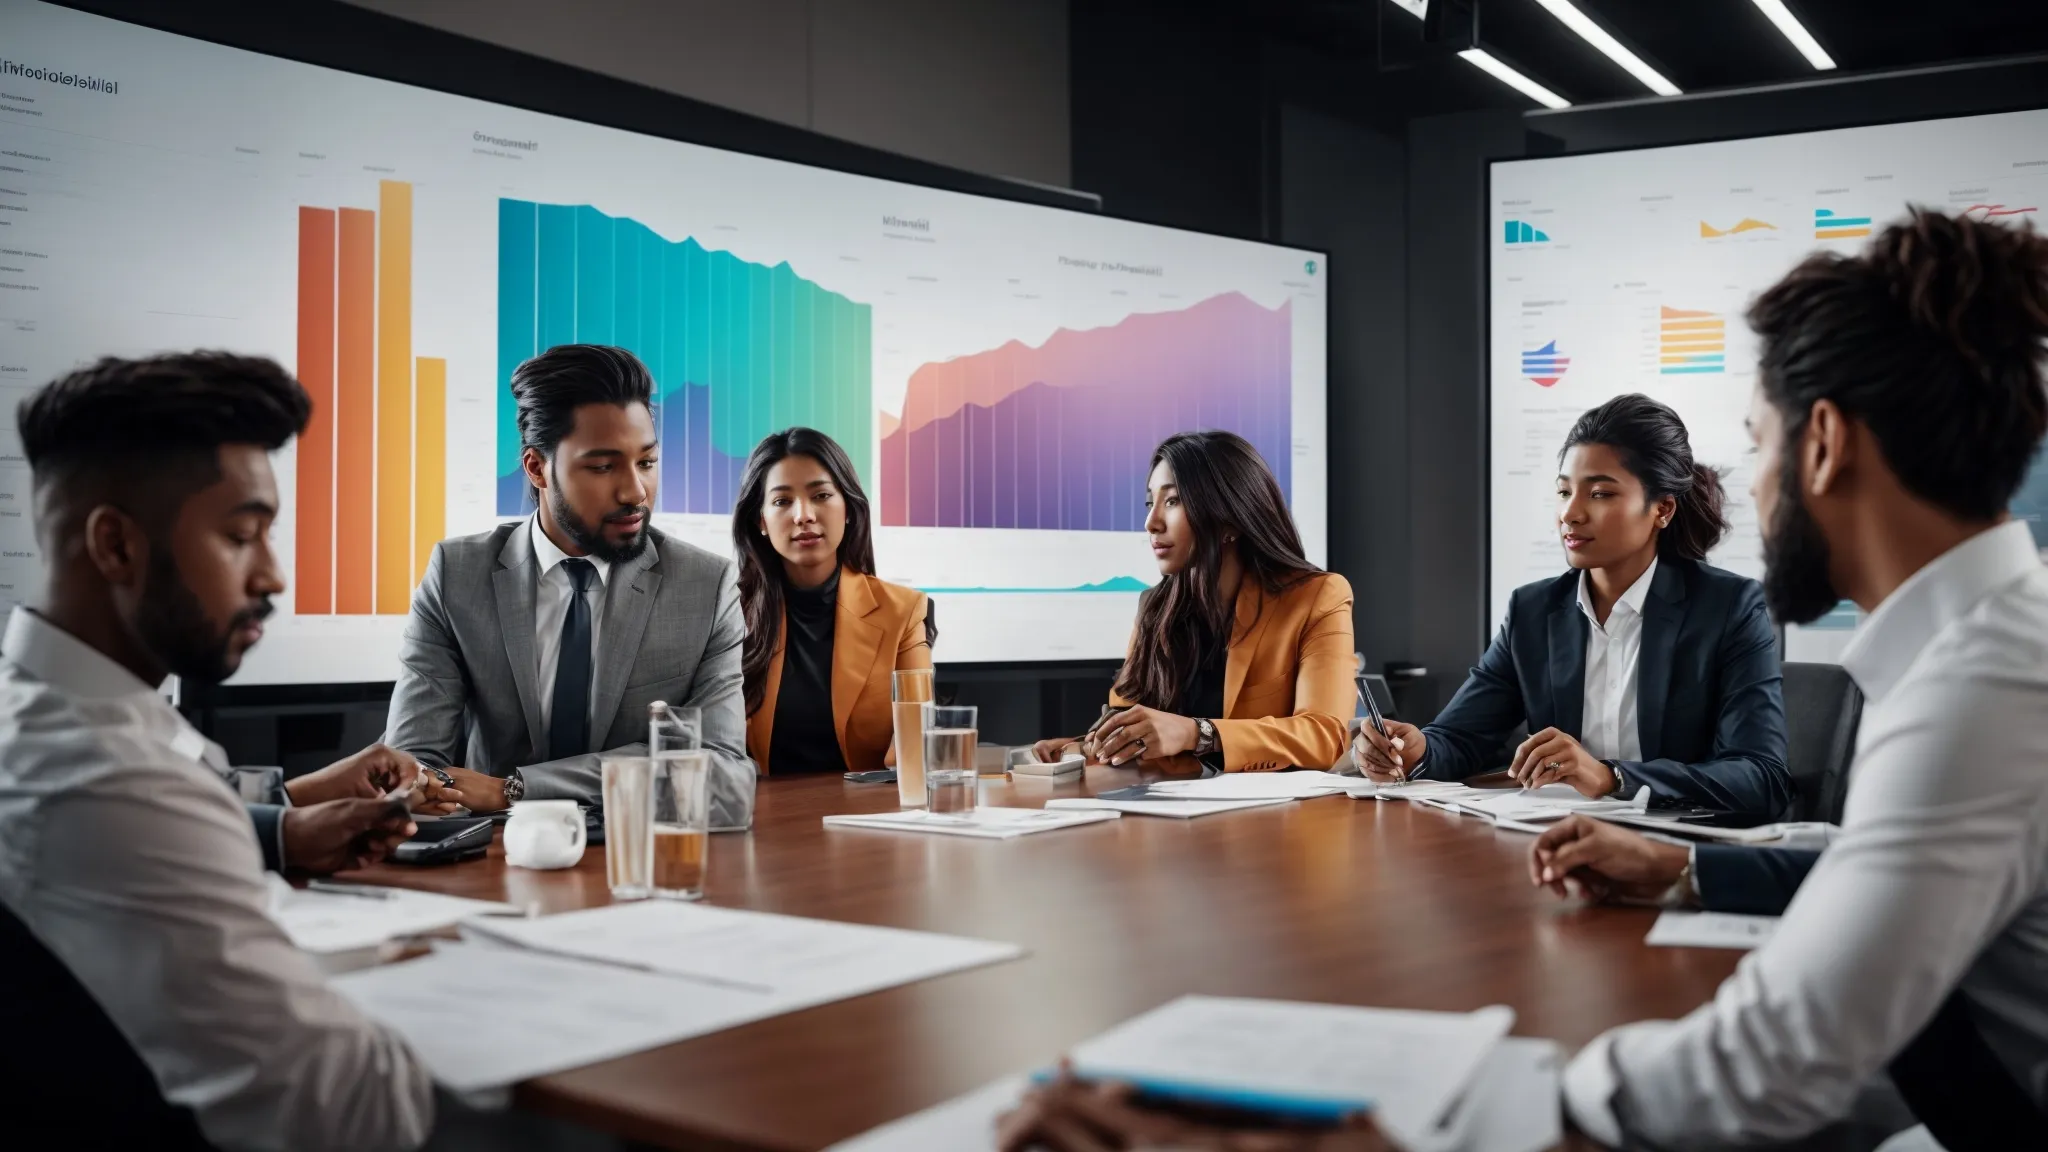 a conference room where a group of professionals are engaged in a lively brainstorming session around a large screen, displaying colorful graphs and marketing analytics.